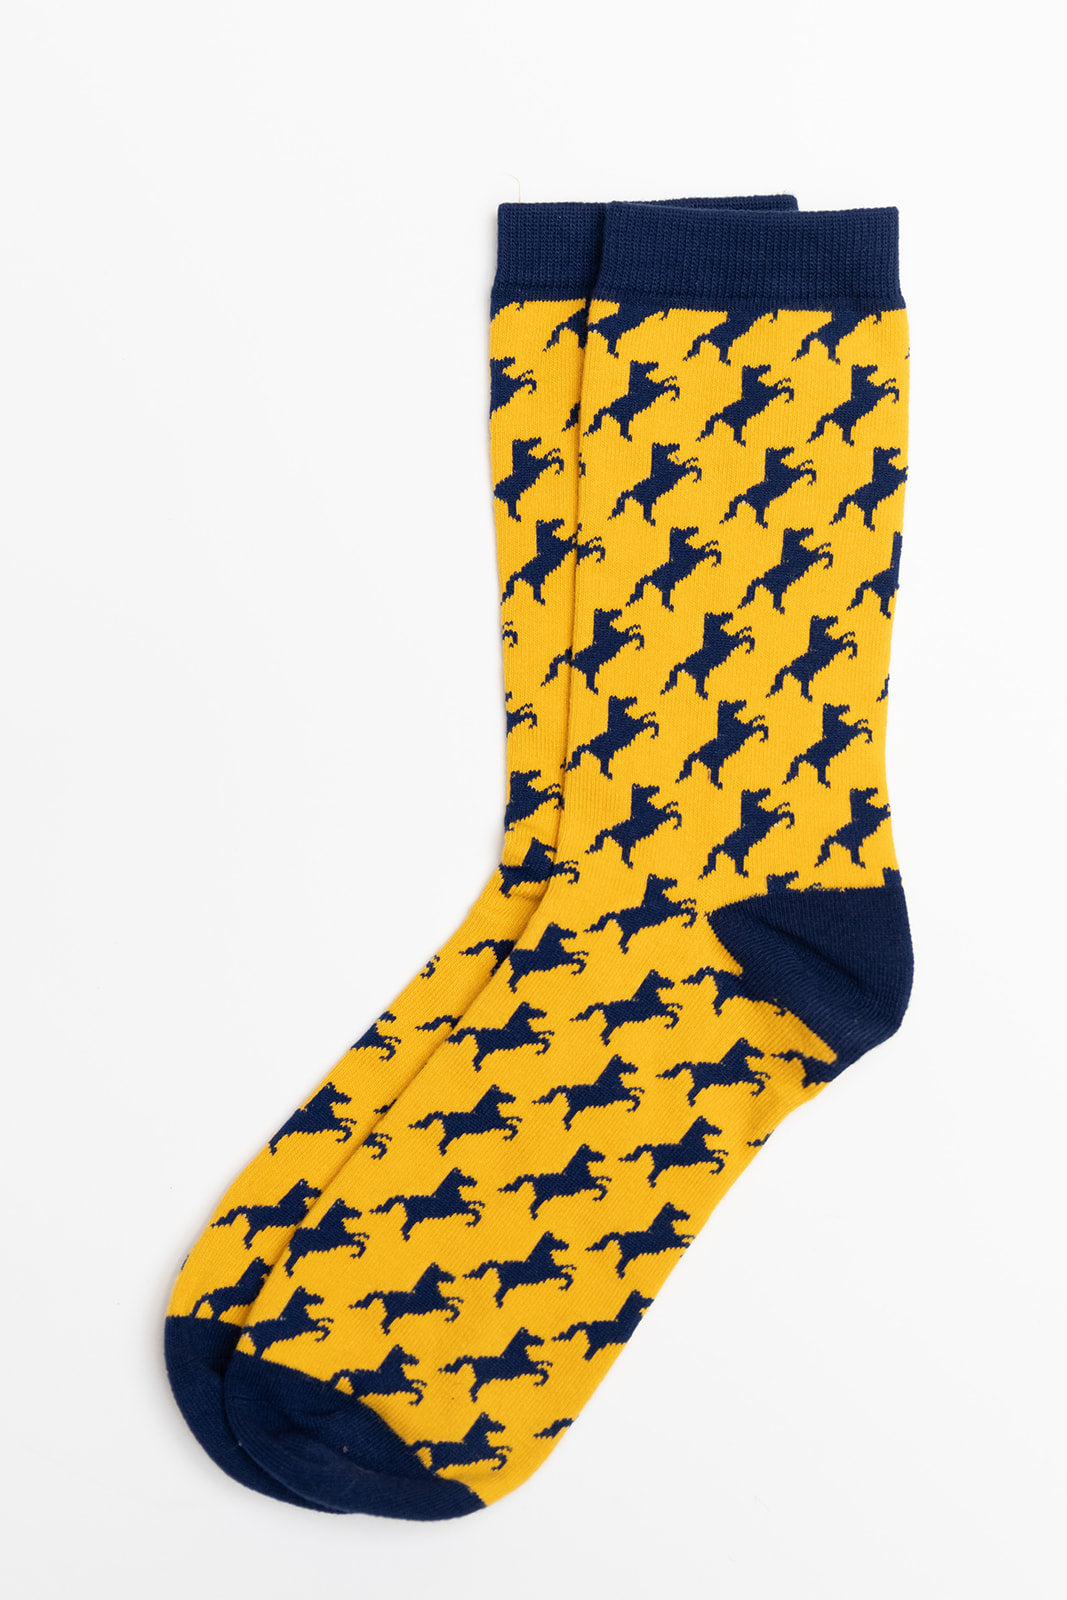 UCO gold and navy broncho sock